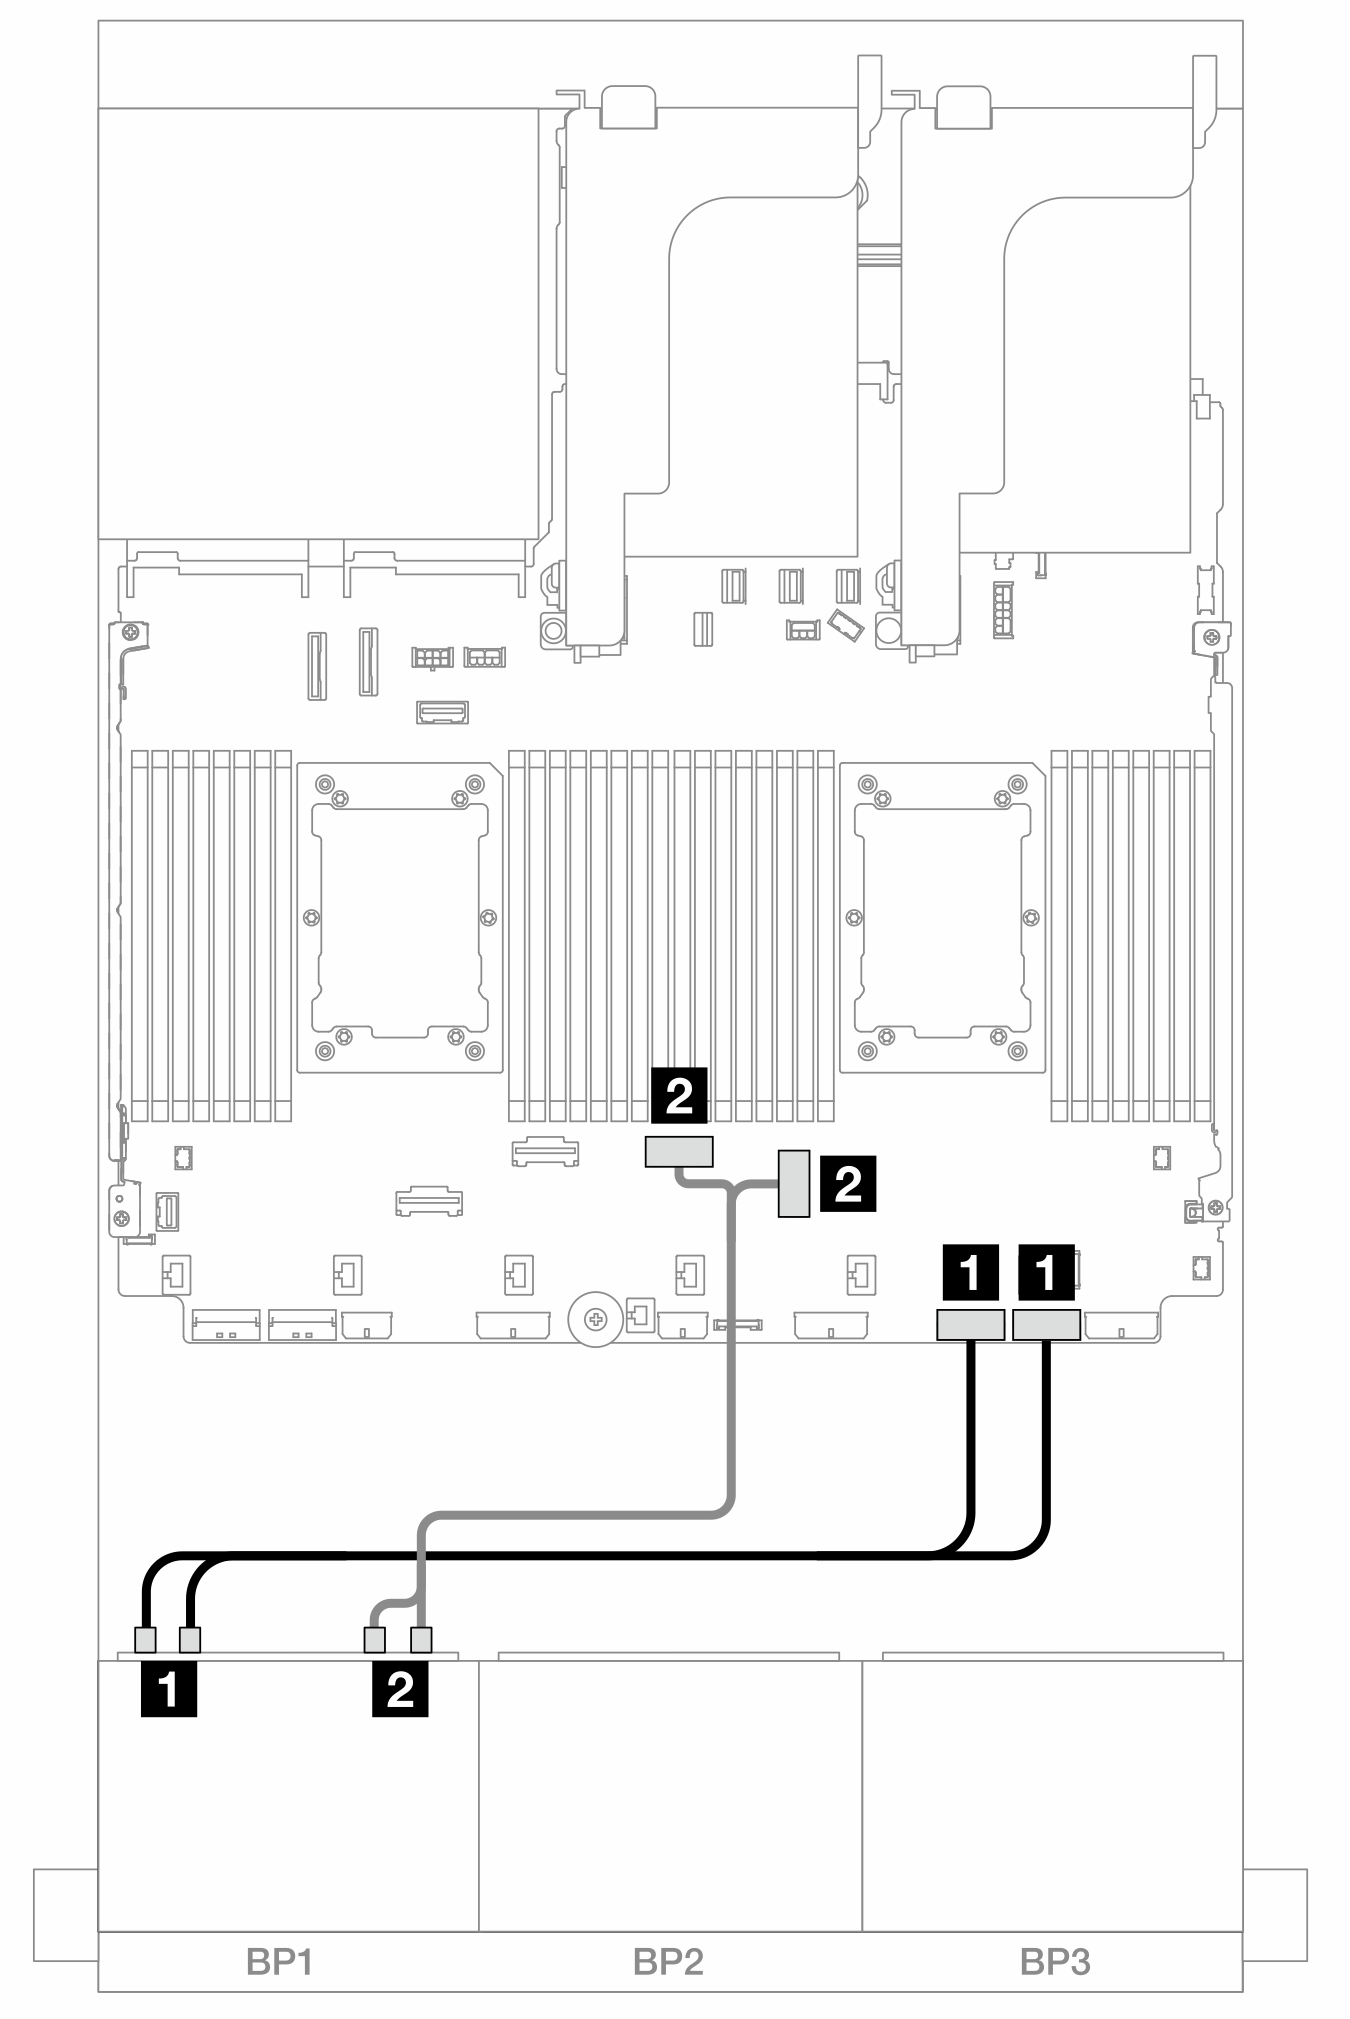 Cable routing when one processor installed